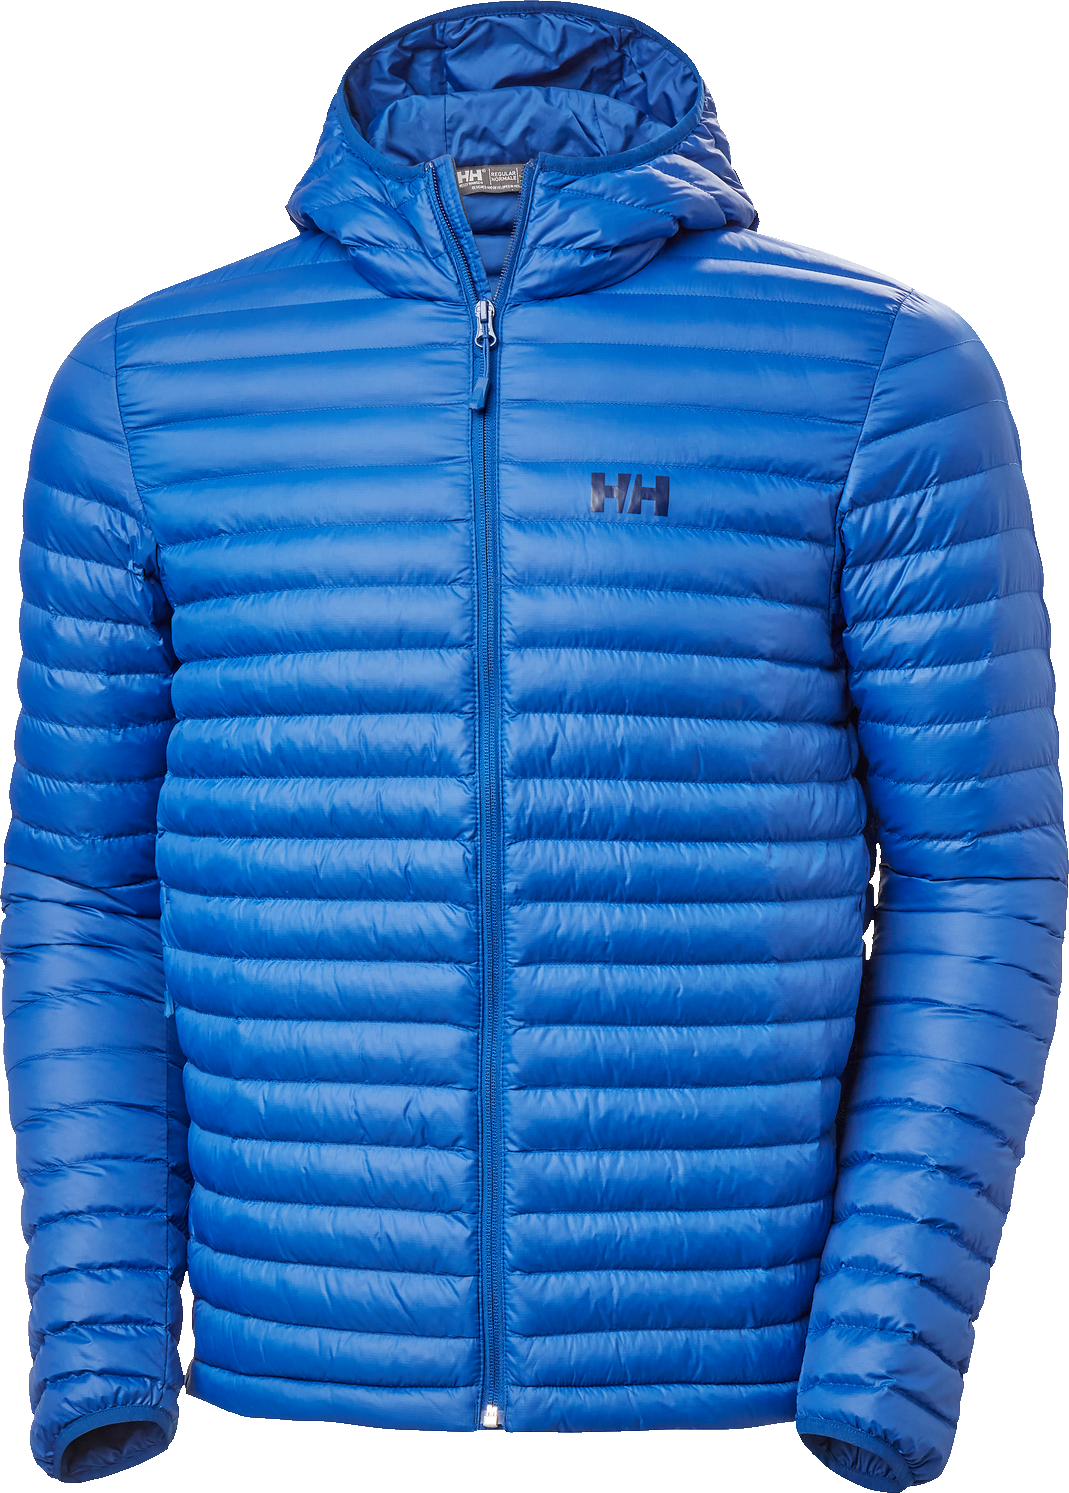 Men’s Sirdal Hooded Insulated Jacket Deep Fjord